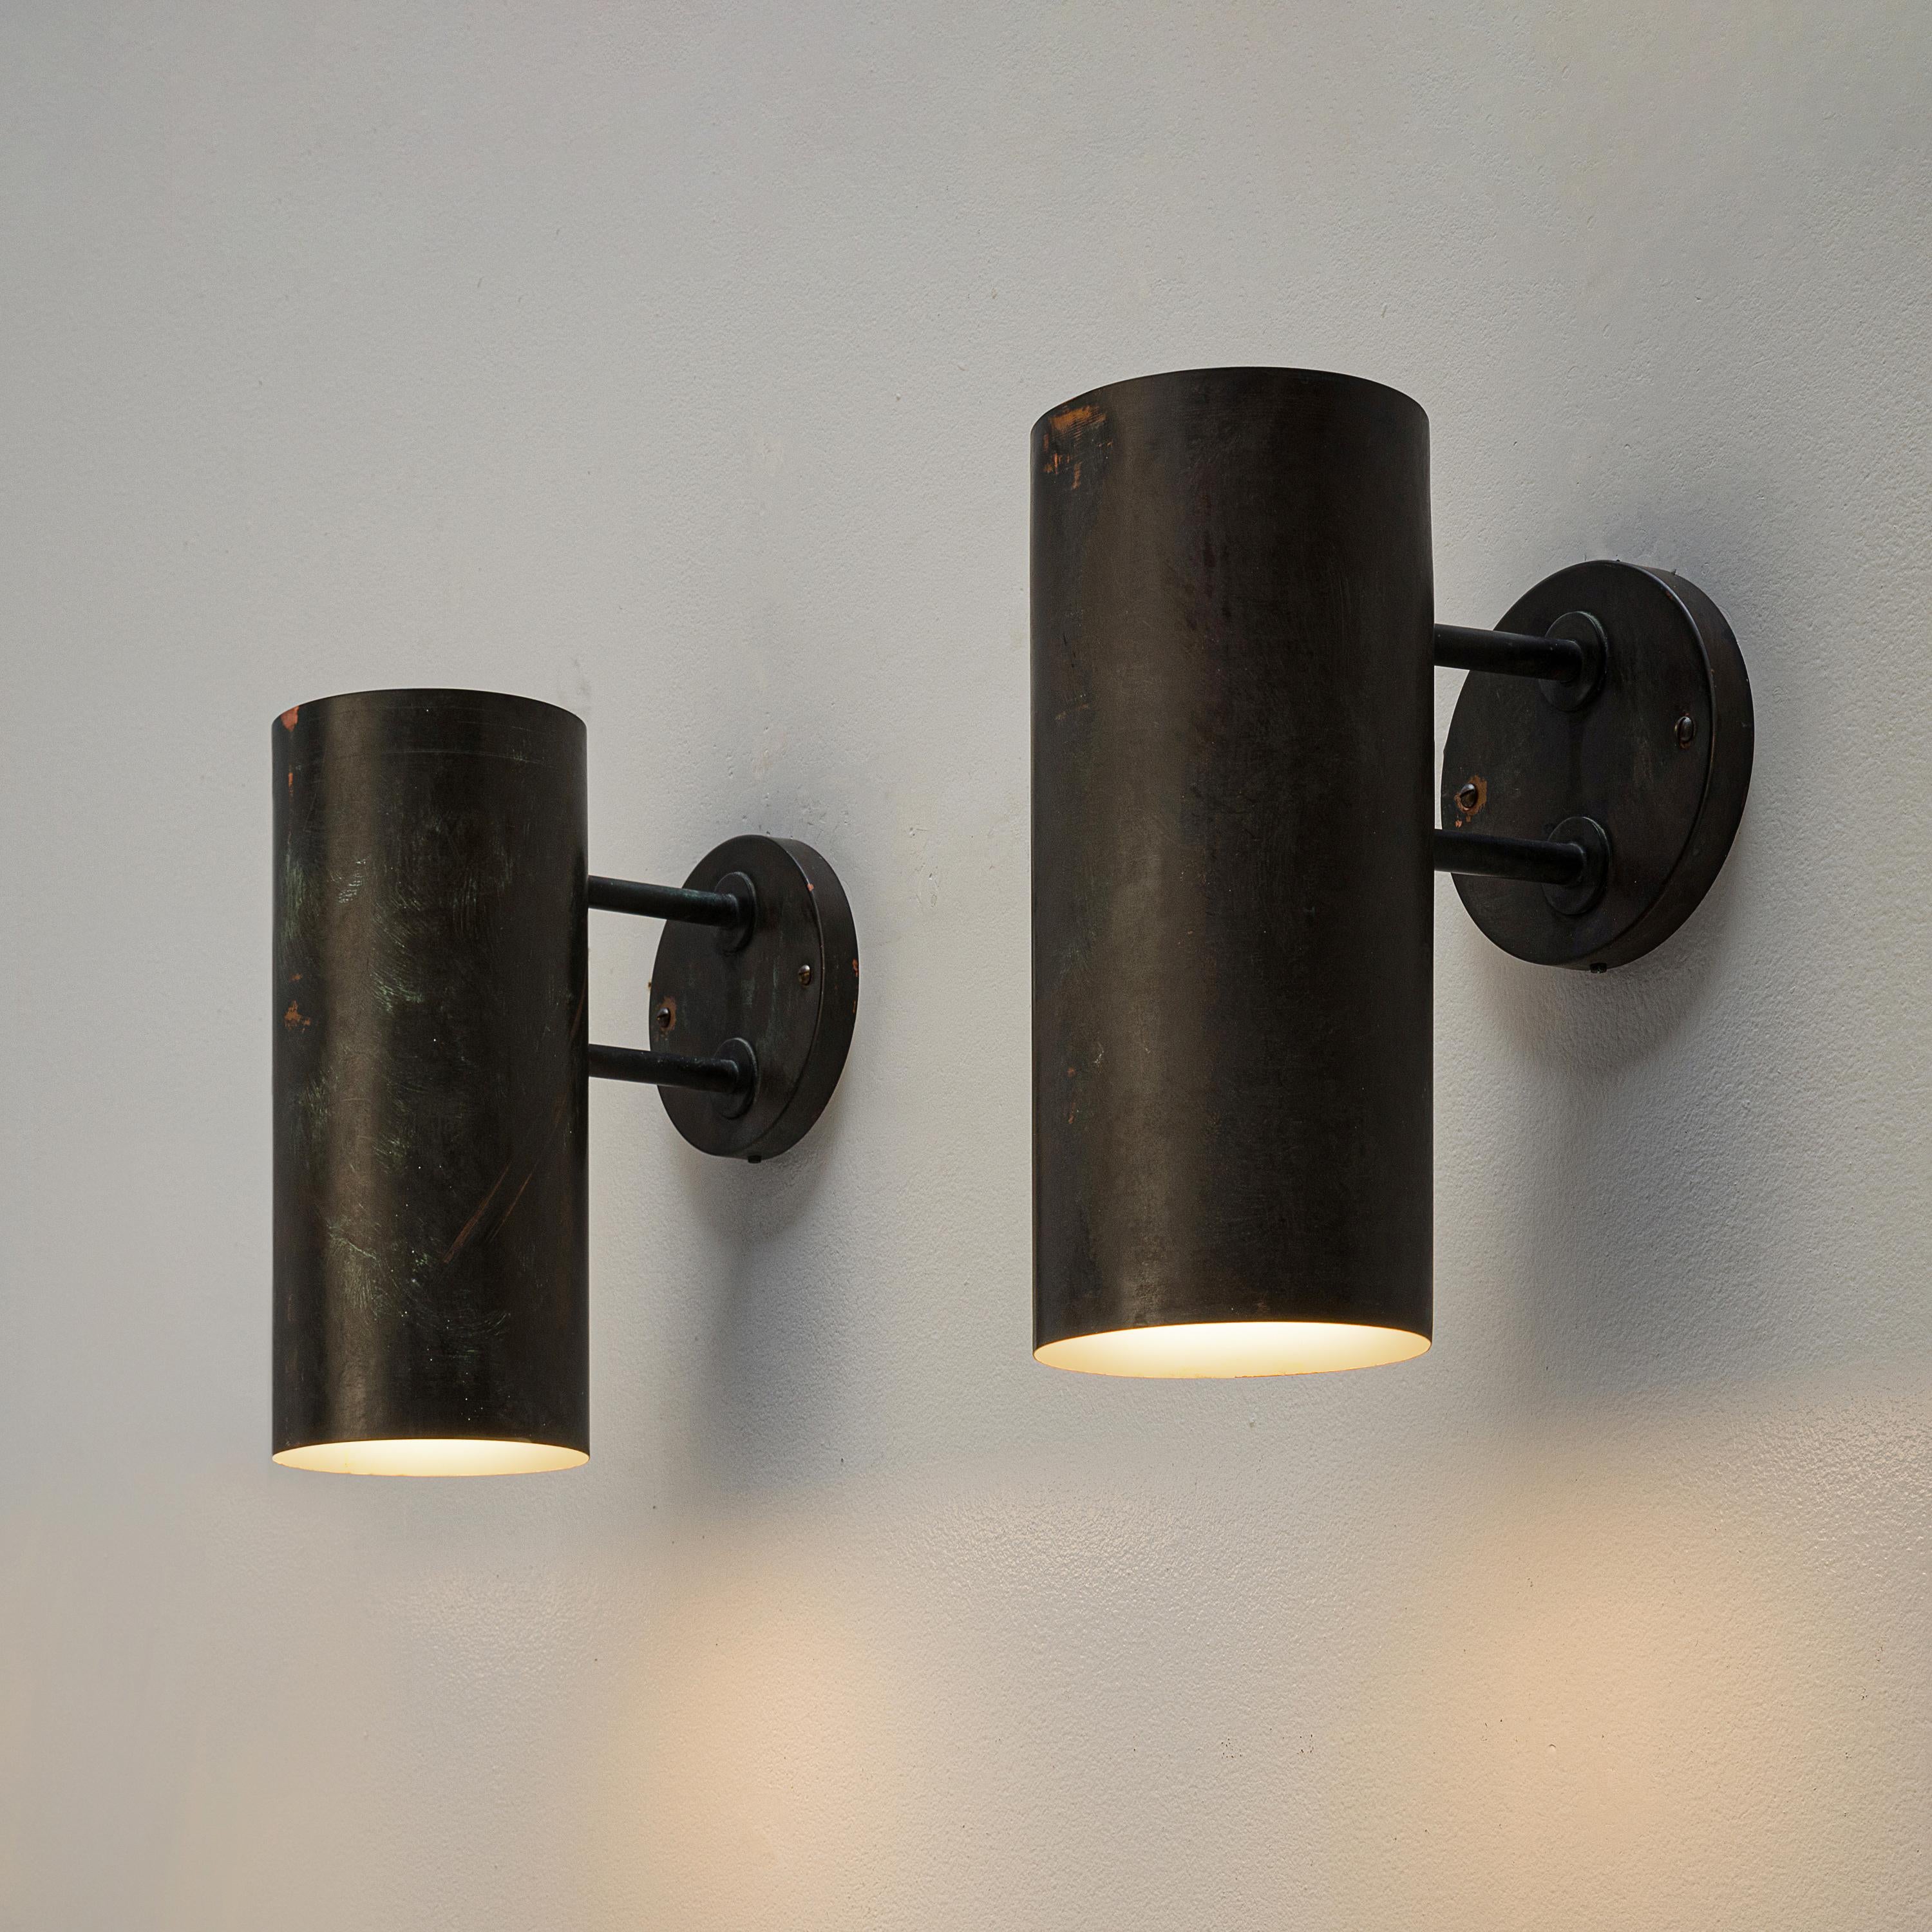 Hans-Agne Jakobsson for AB Markaryd, wall lights, copper, Sweden, 1960s.

These wall lights are executed in patinated copper. The light, that is reflected by the patinated copper creates a beautiful atmosphere. The exiting shape of the fixture is